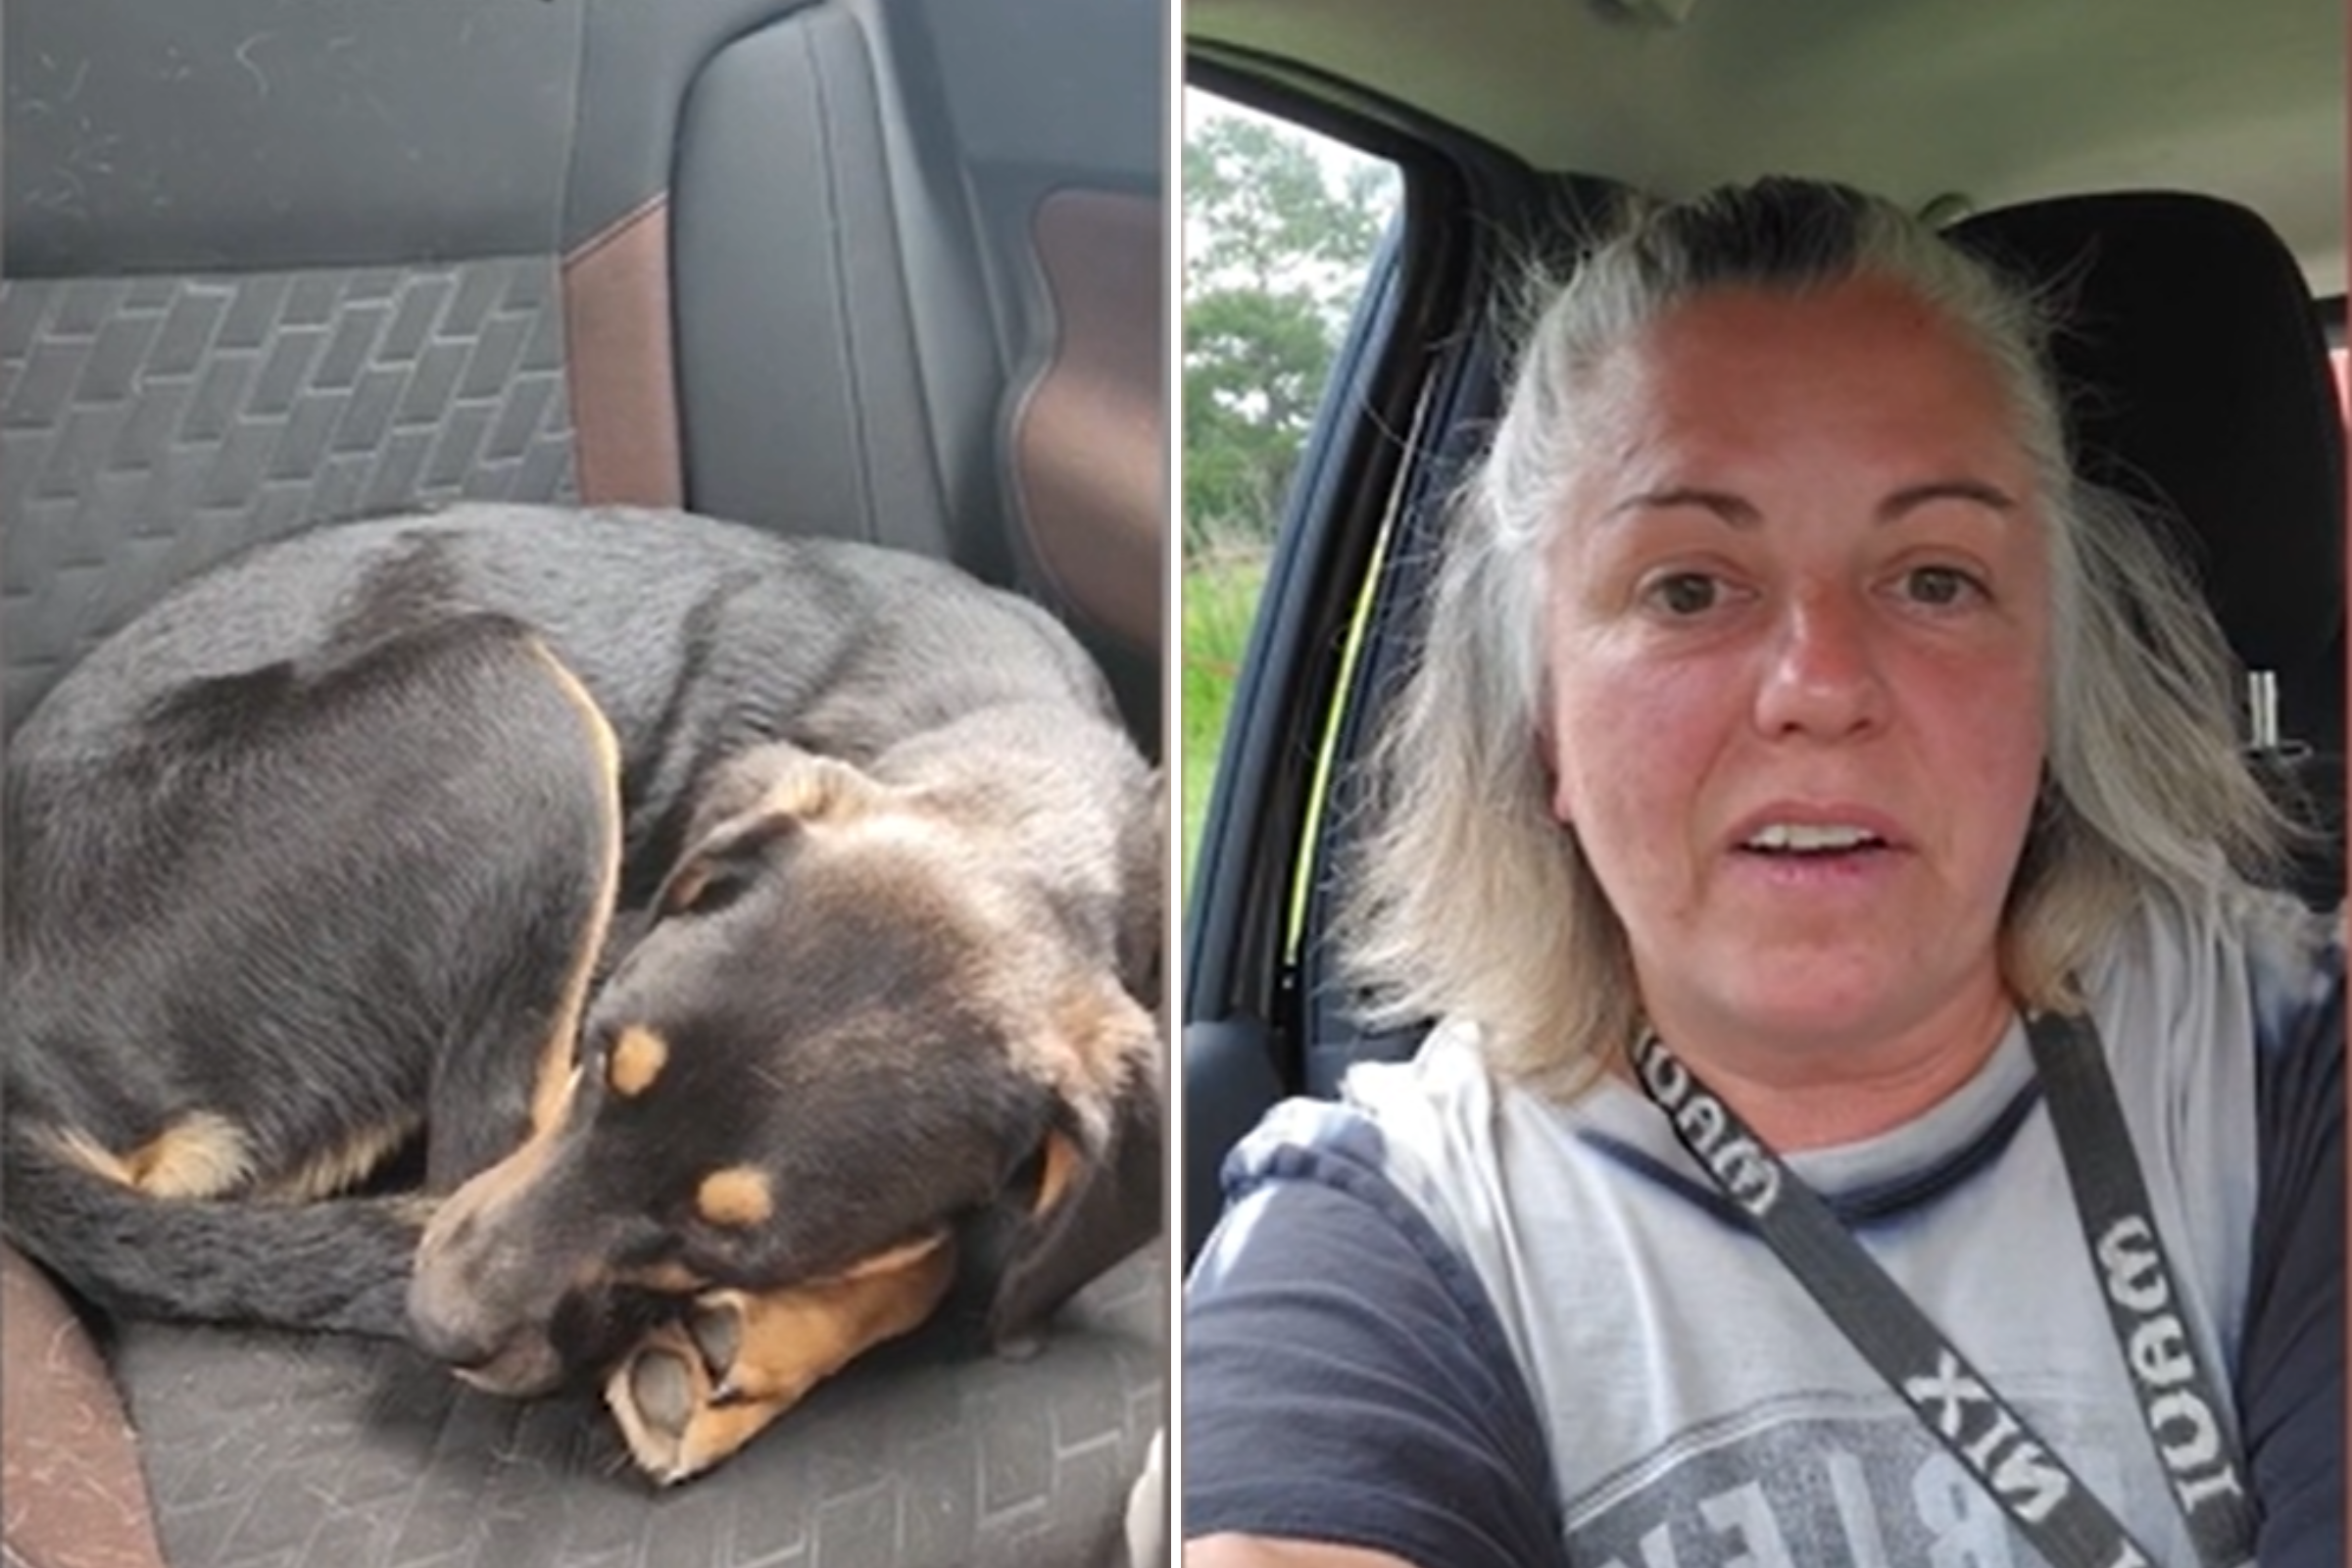 Woman rescues dog mid-way through euthanasia process: “Purpose in life”